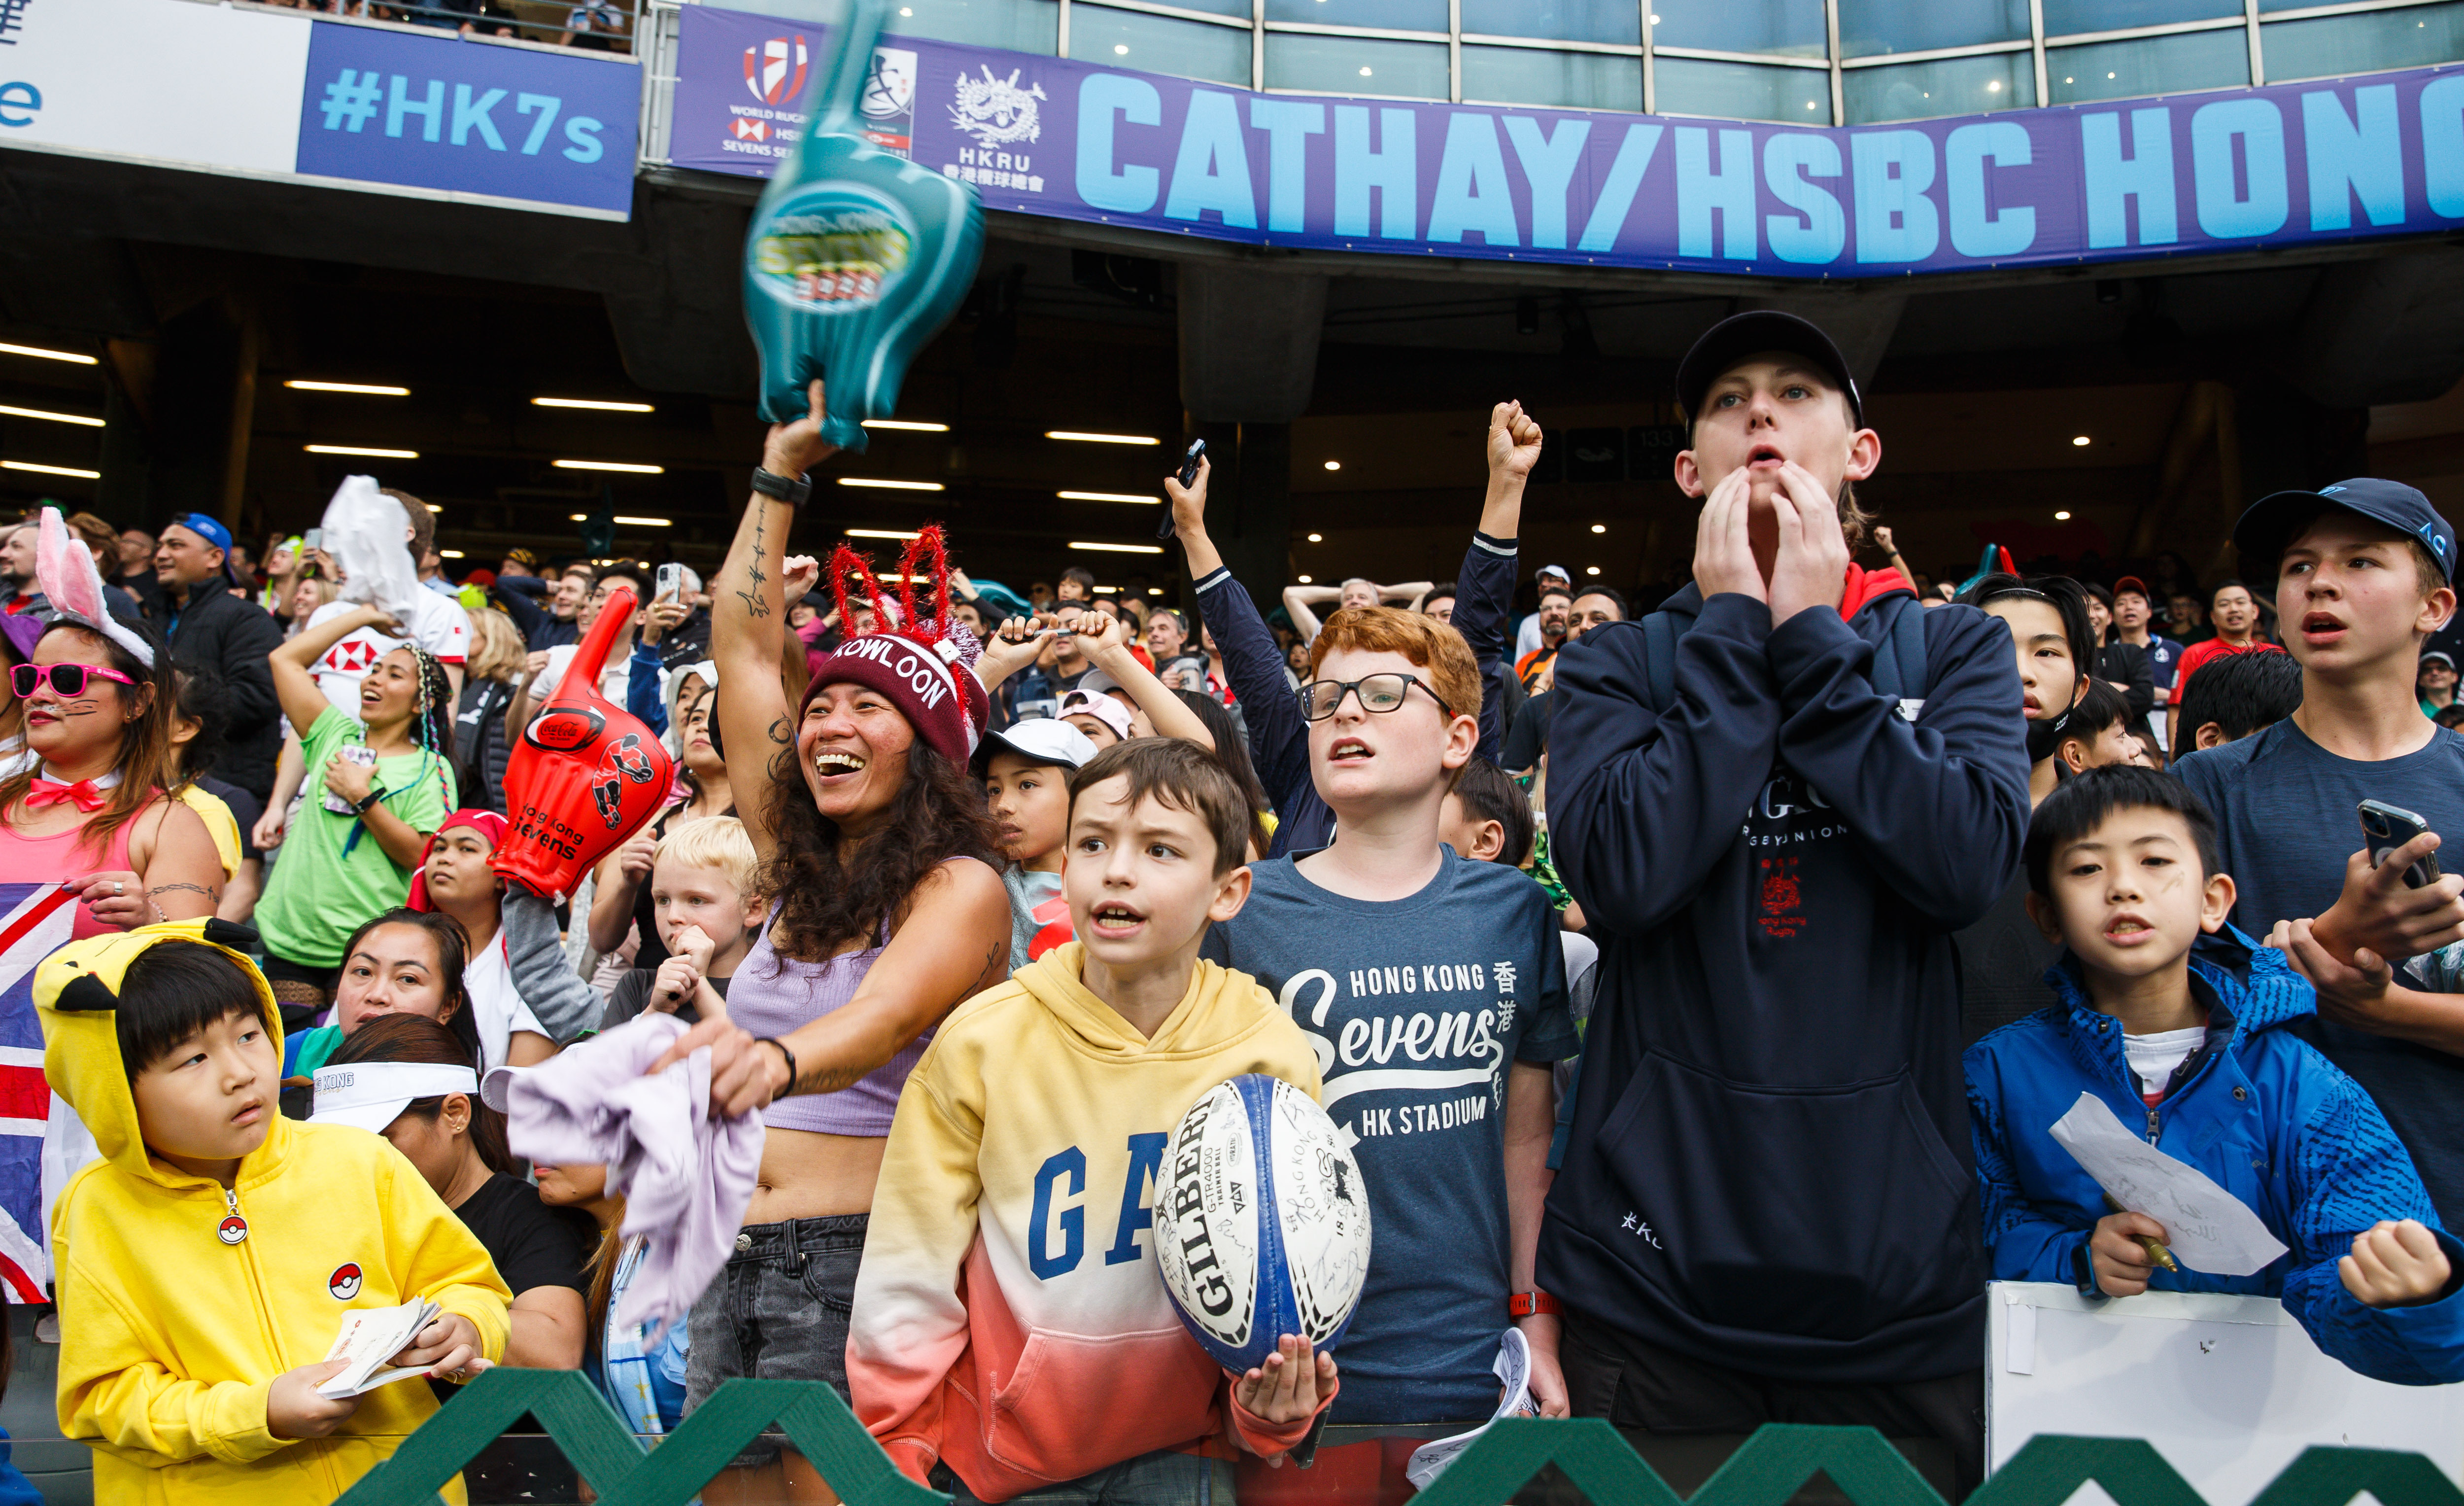 Ticket sales for the Cathay/HSBC Hong Kong Sevens will officially open on 1 December